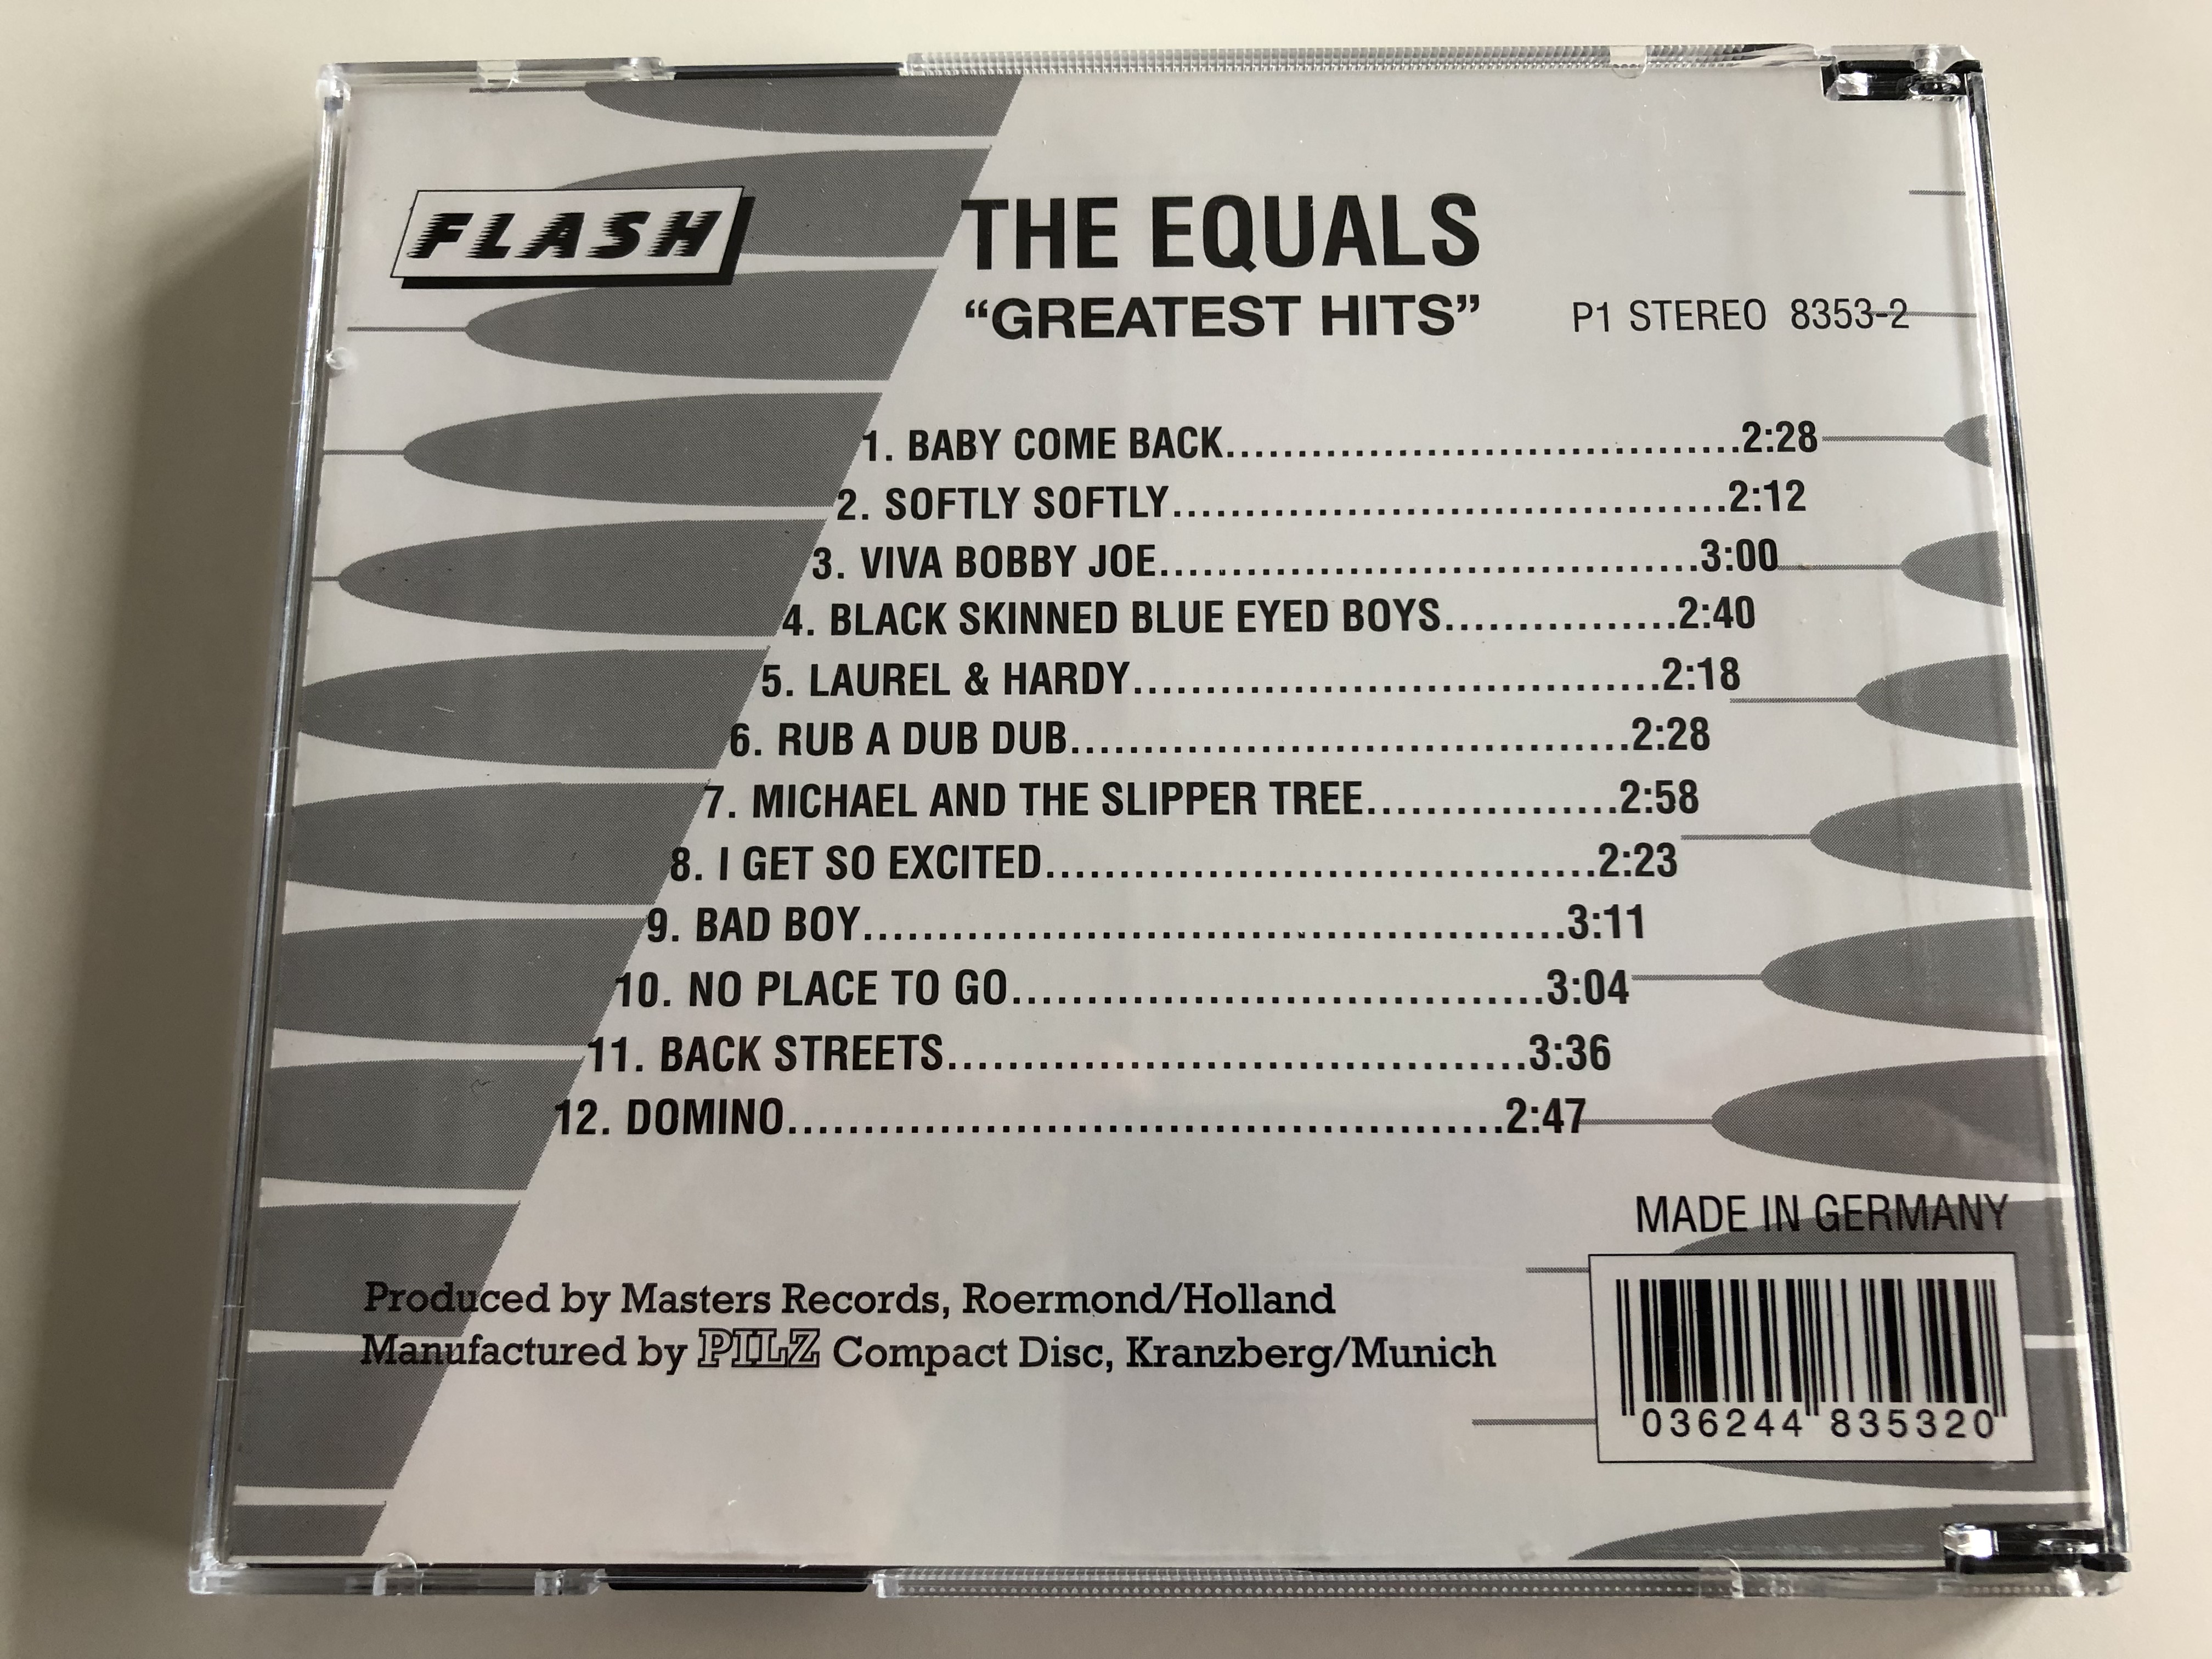 the-equals-greatest-hits-baby-come-back-i-get-so-excite-viva-bobby-joe-domino-and-others-flash-audio-cd-stereo-8353-2-2-.jpg